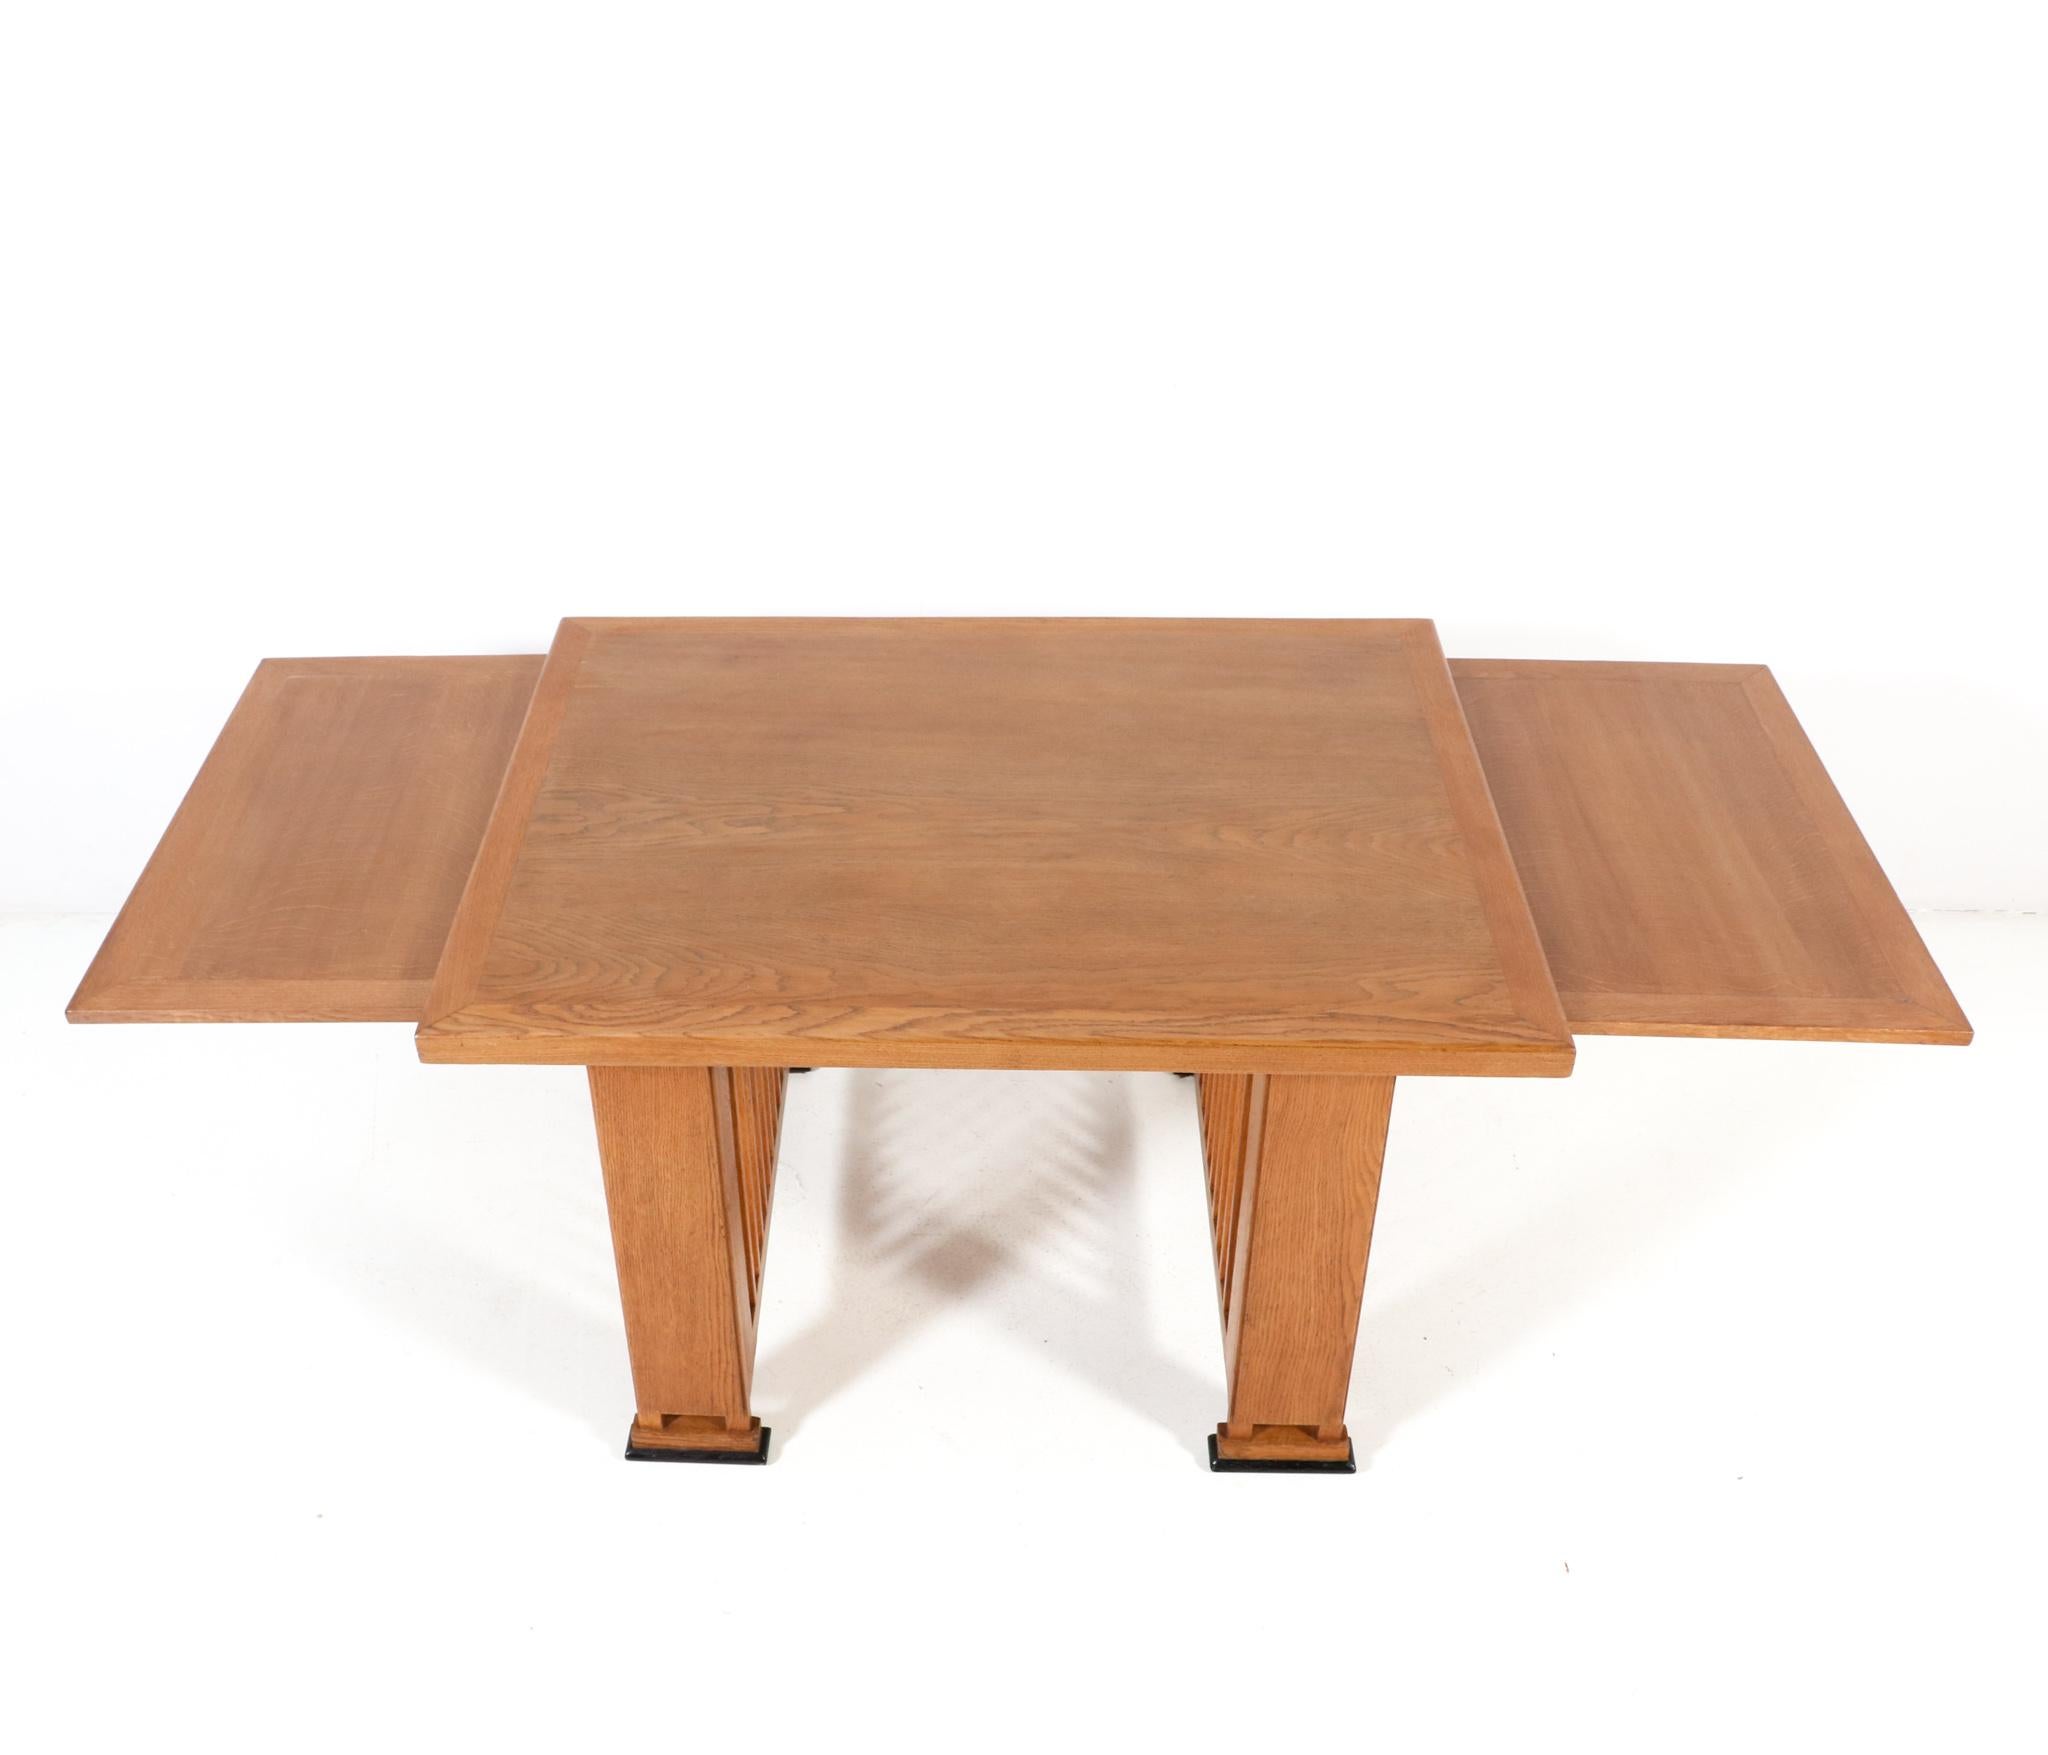 Oak Art Deco Modernist Writing Table or Dining Table by Architect Caspers, 1920s For Sale 1